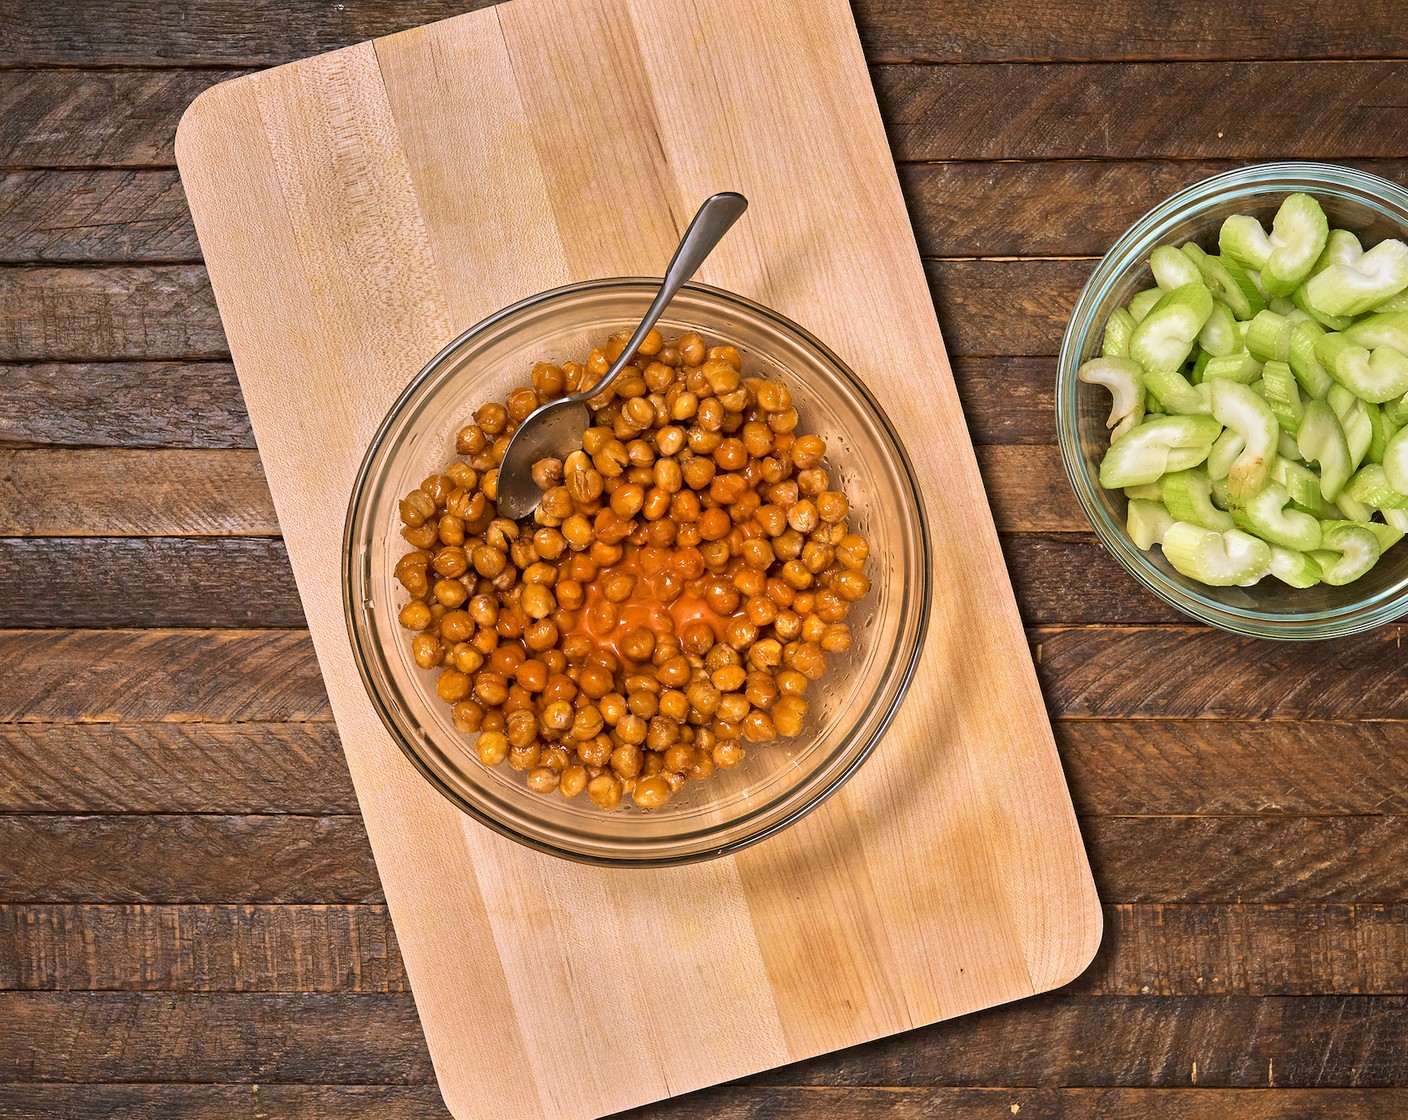 step 4 Transfer the roasted chickpeas to a large bowl. Pour in the Buffalo Sauce (1/2 cup) and stir well to combine.